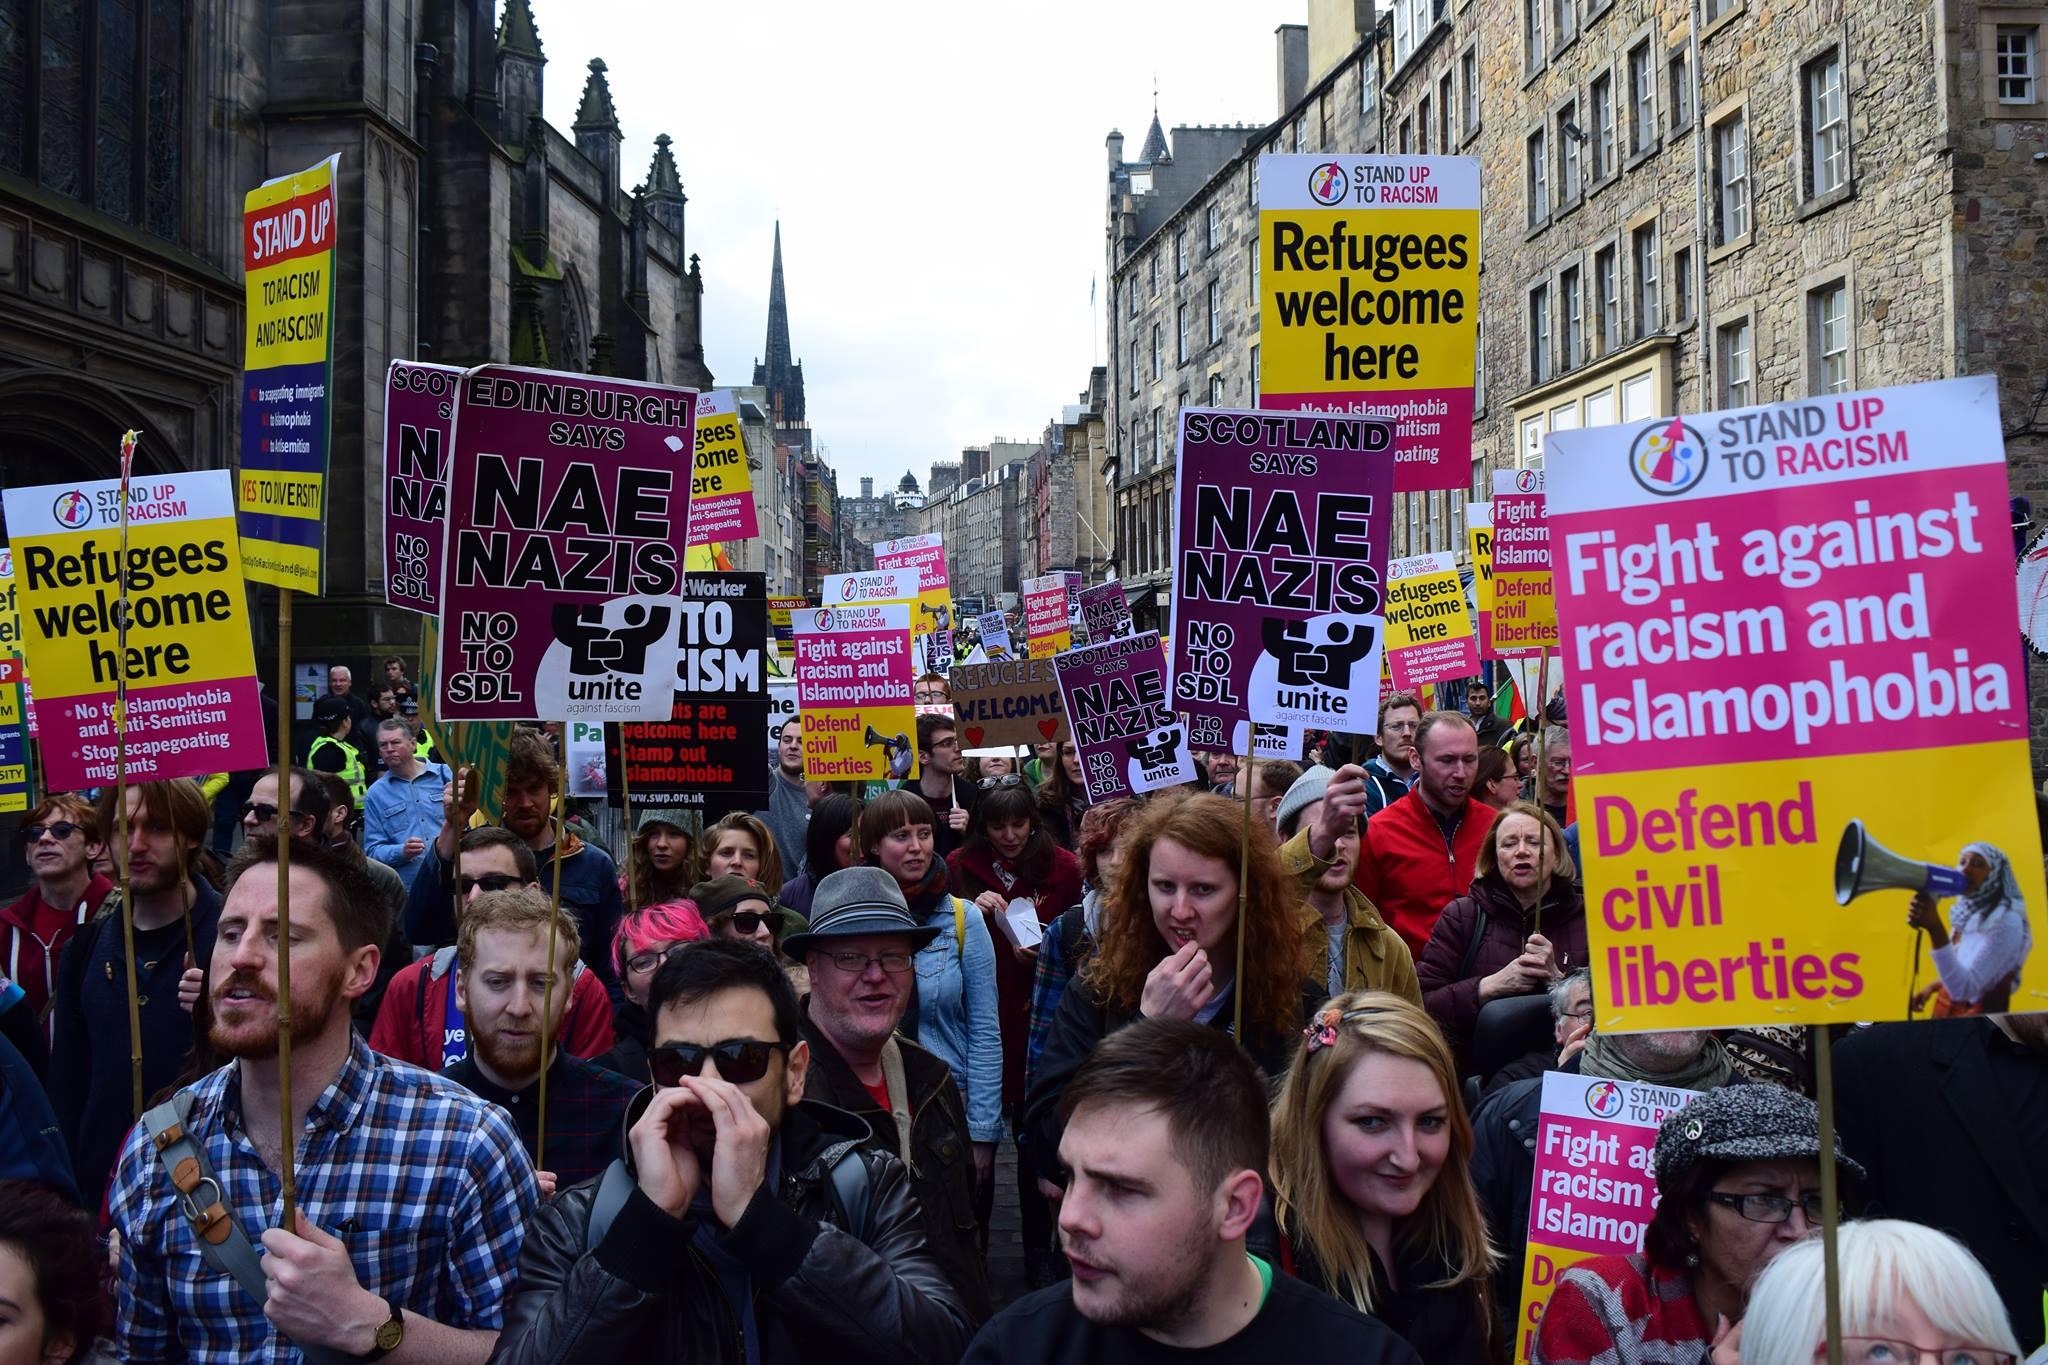 Protesters at an anti-racism march in Scotland